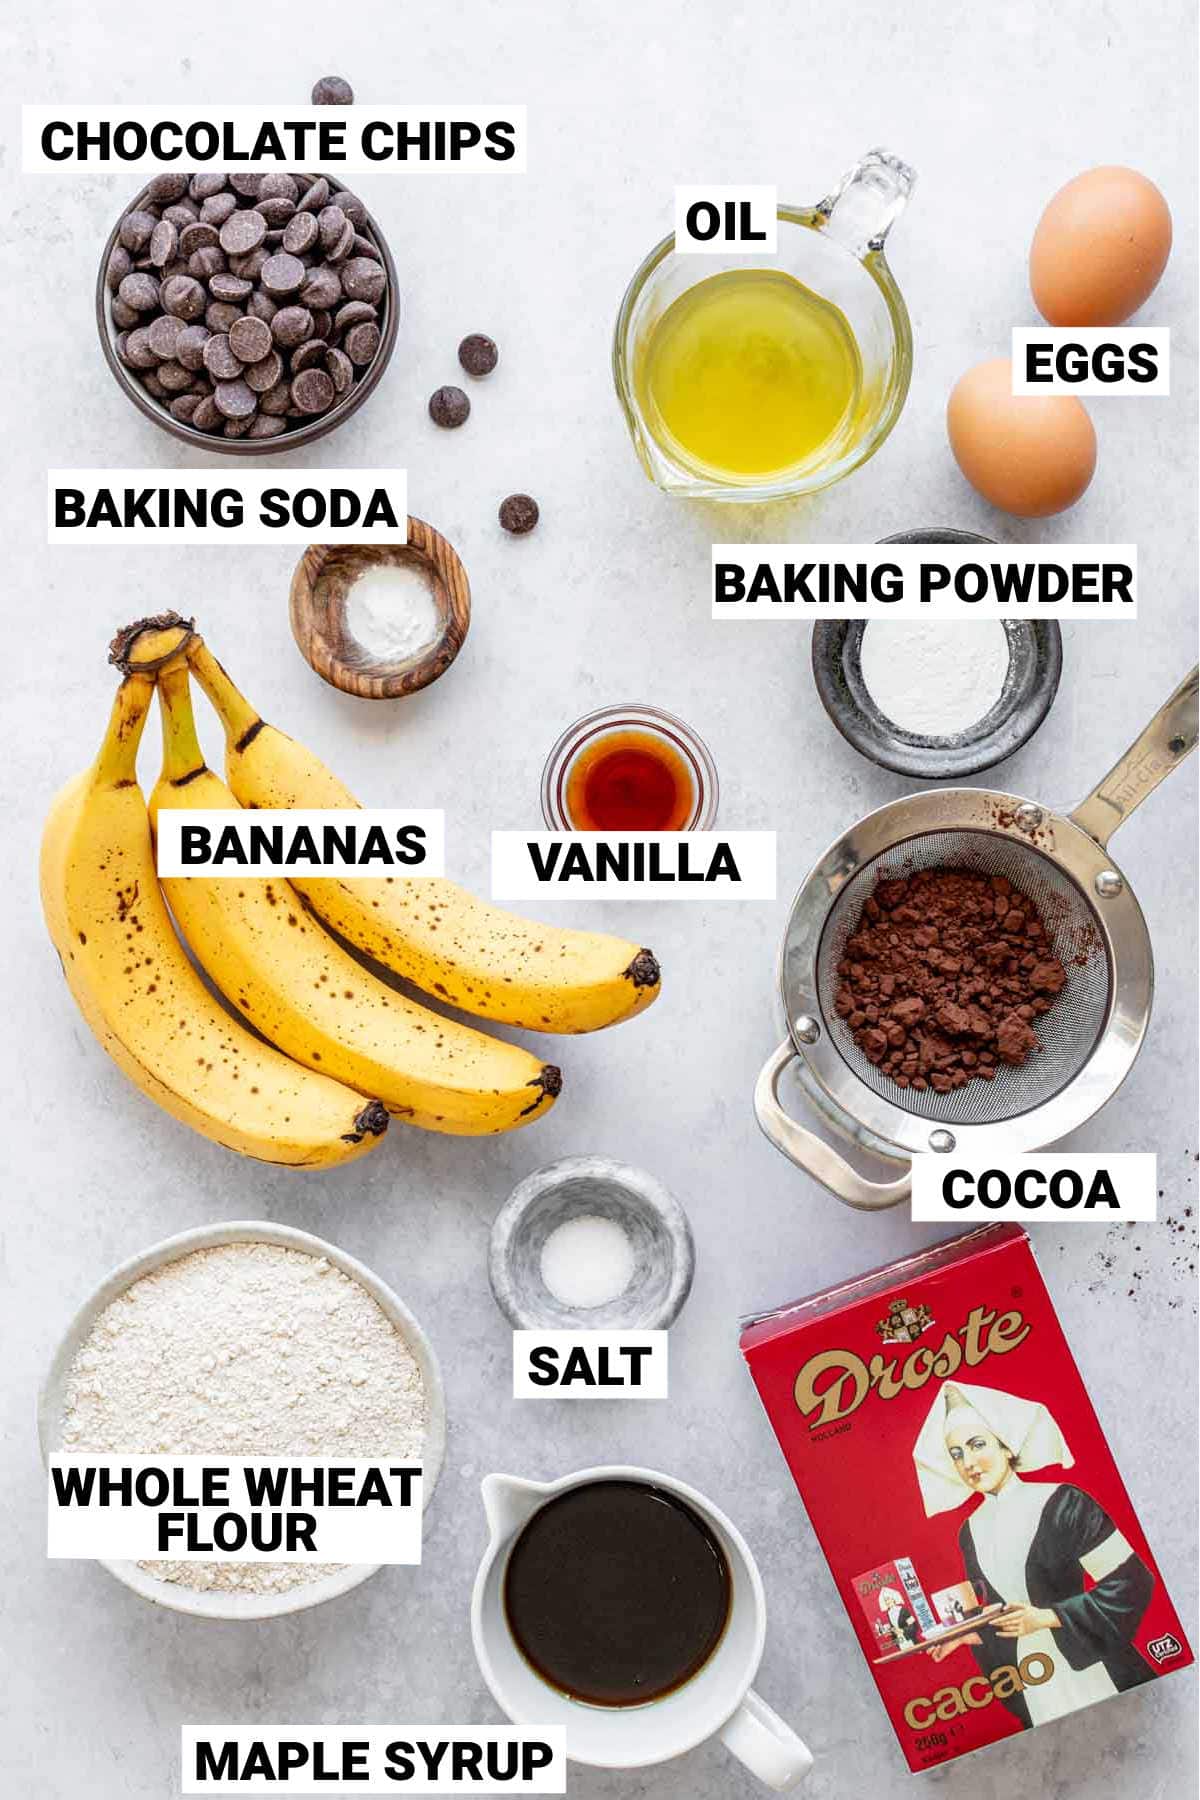 c،colate chips, oil, eggs, baking soda, baking powder, vanilla, banana, salt, cocoa, maple syrup, and w،le wheat flour set out to make w،le wheat c،colate banana bread